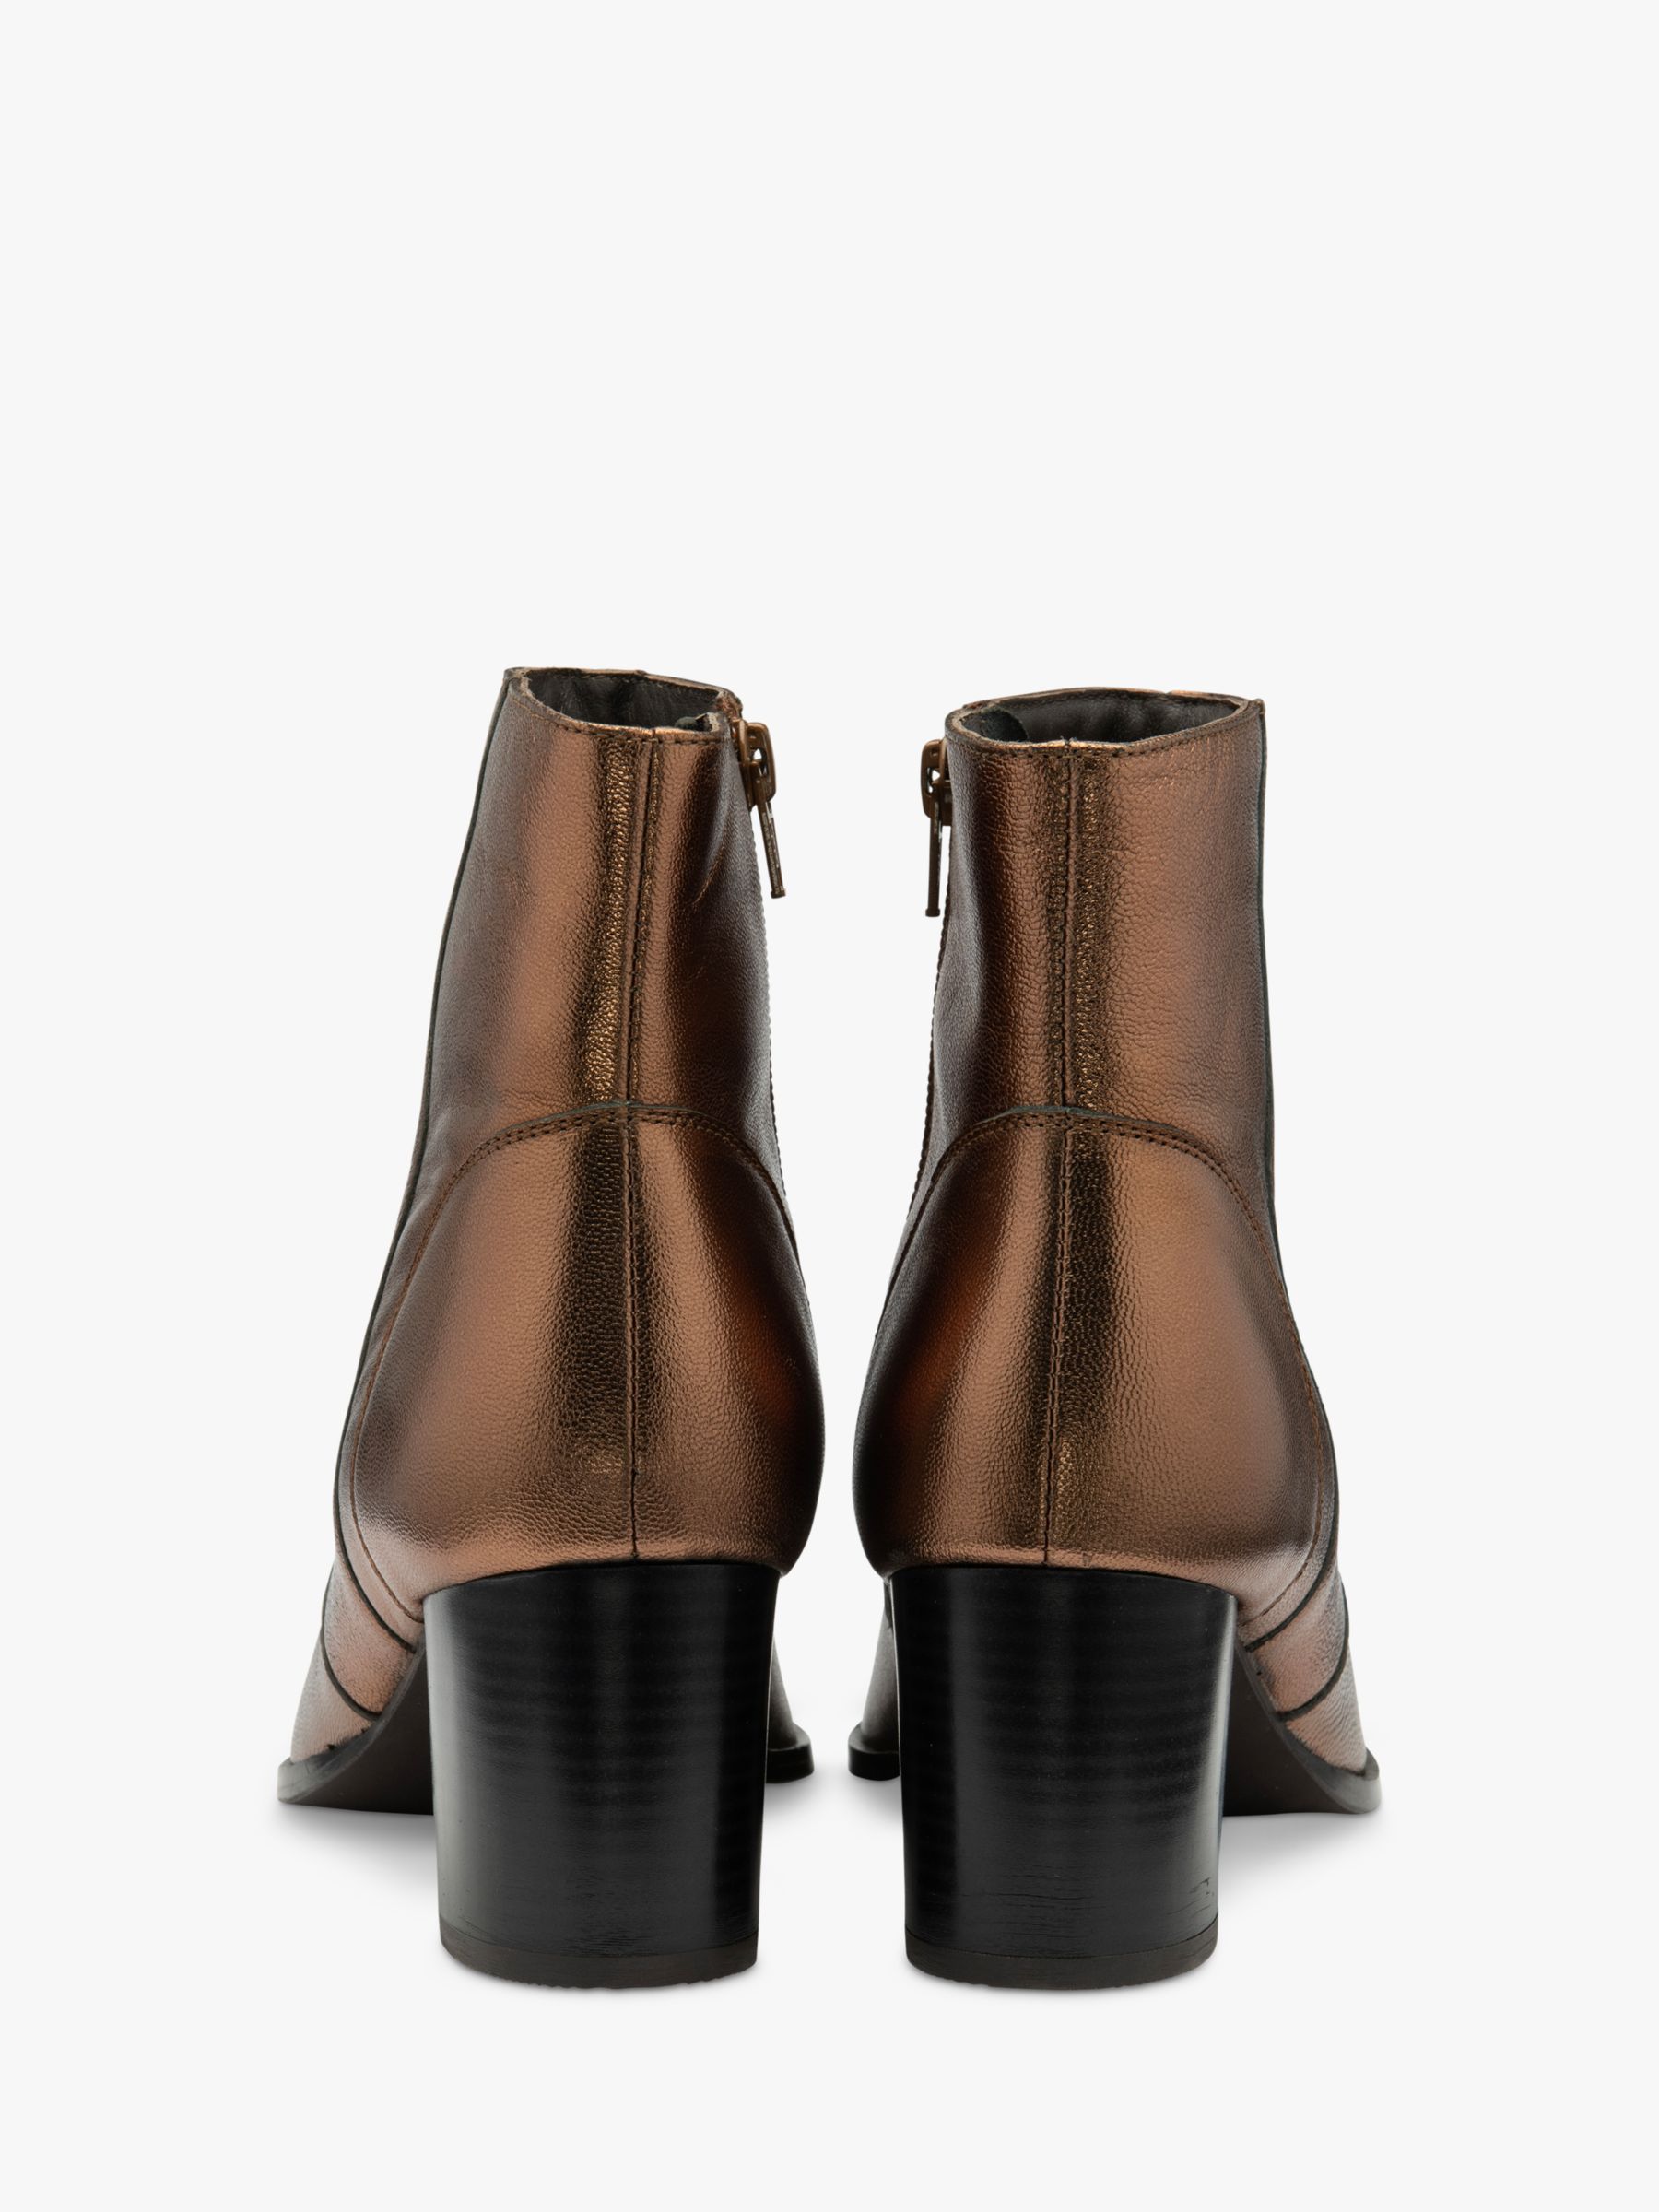 Ravel Louth Leather Ankle Boots, Copper at John Lewis & Partners